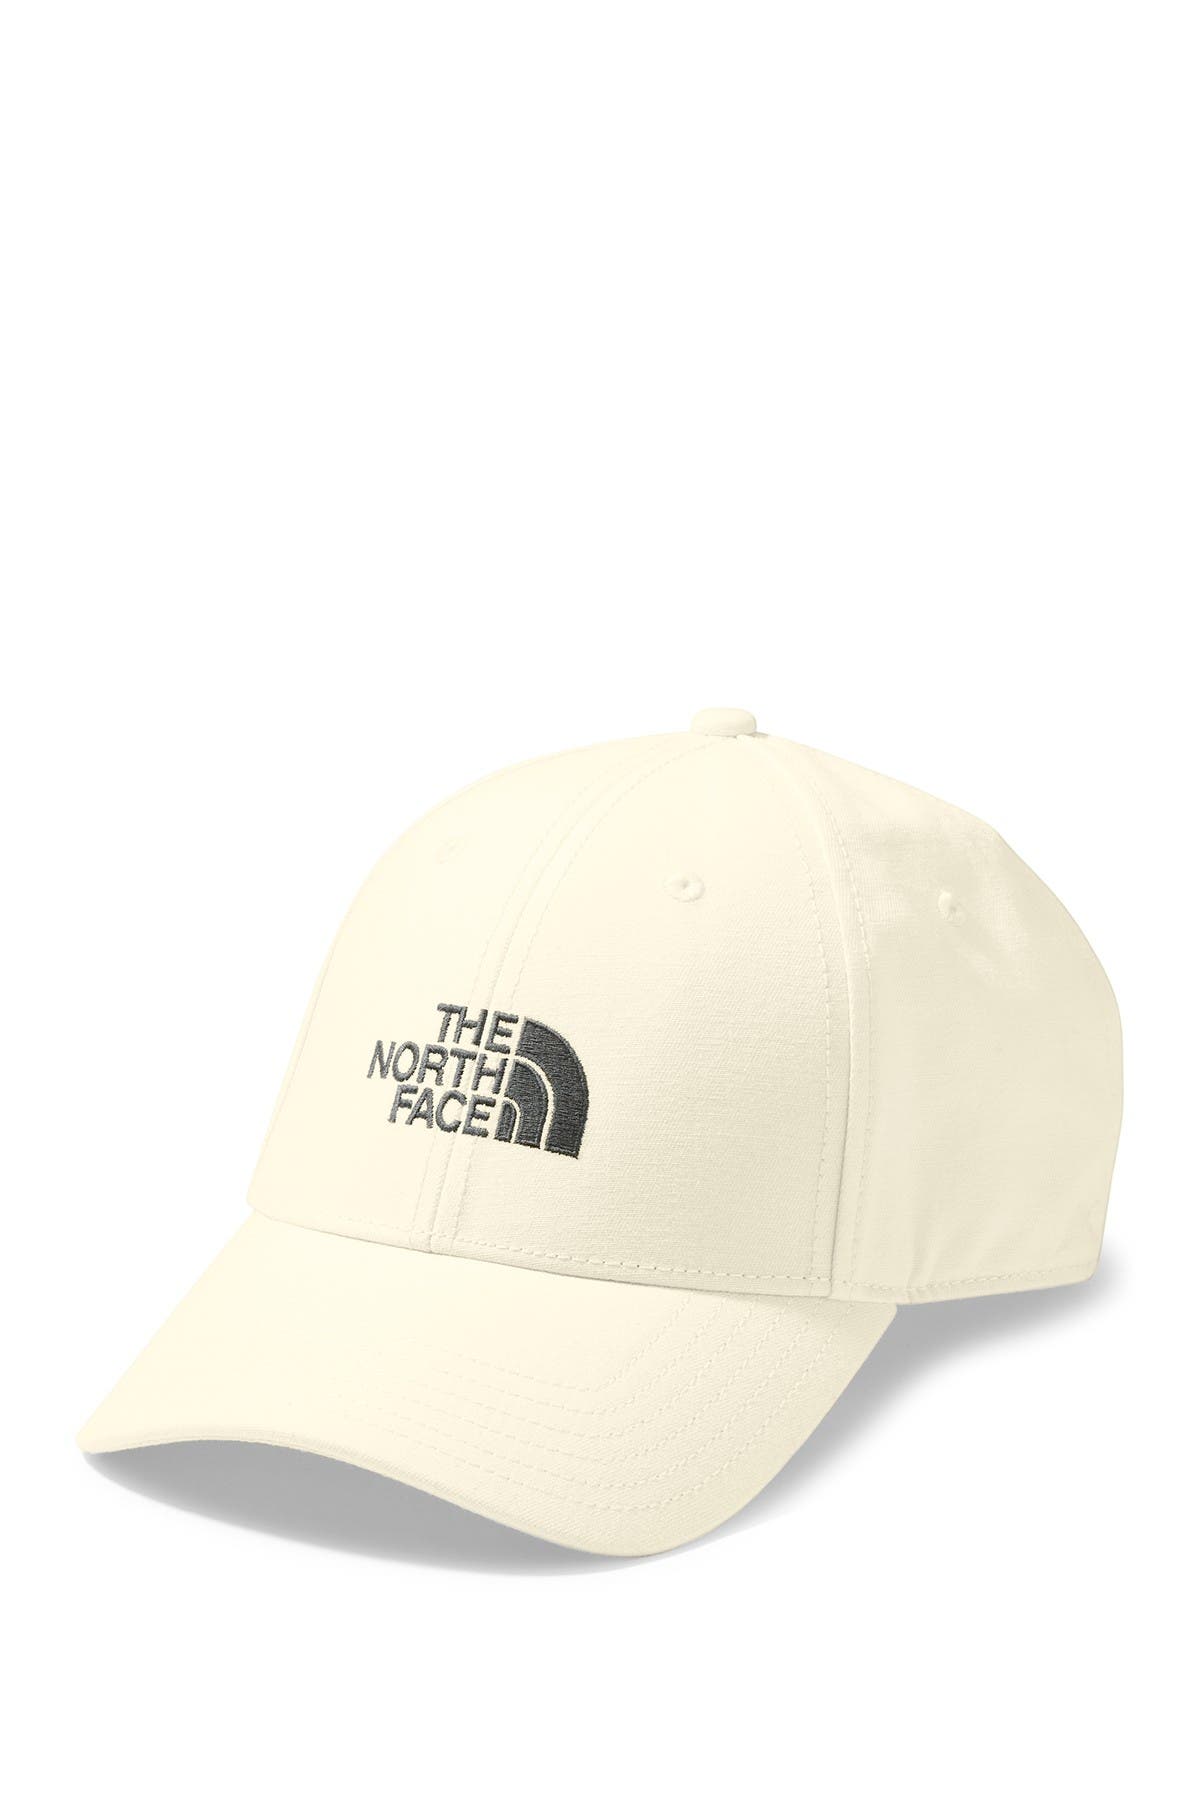 The North Face 66 Classic Hat Nordstrom Rack